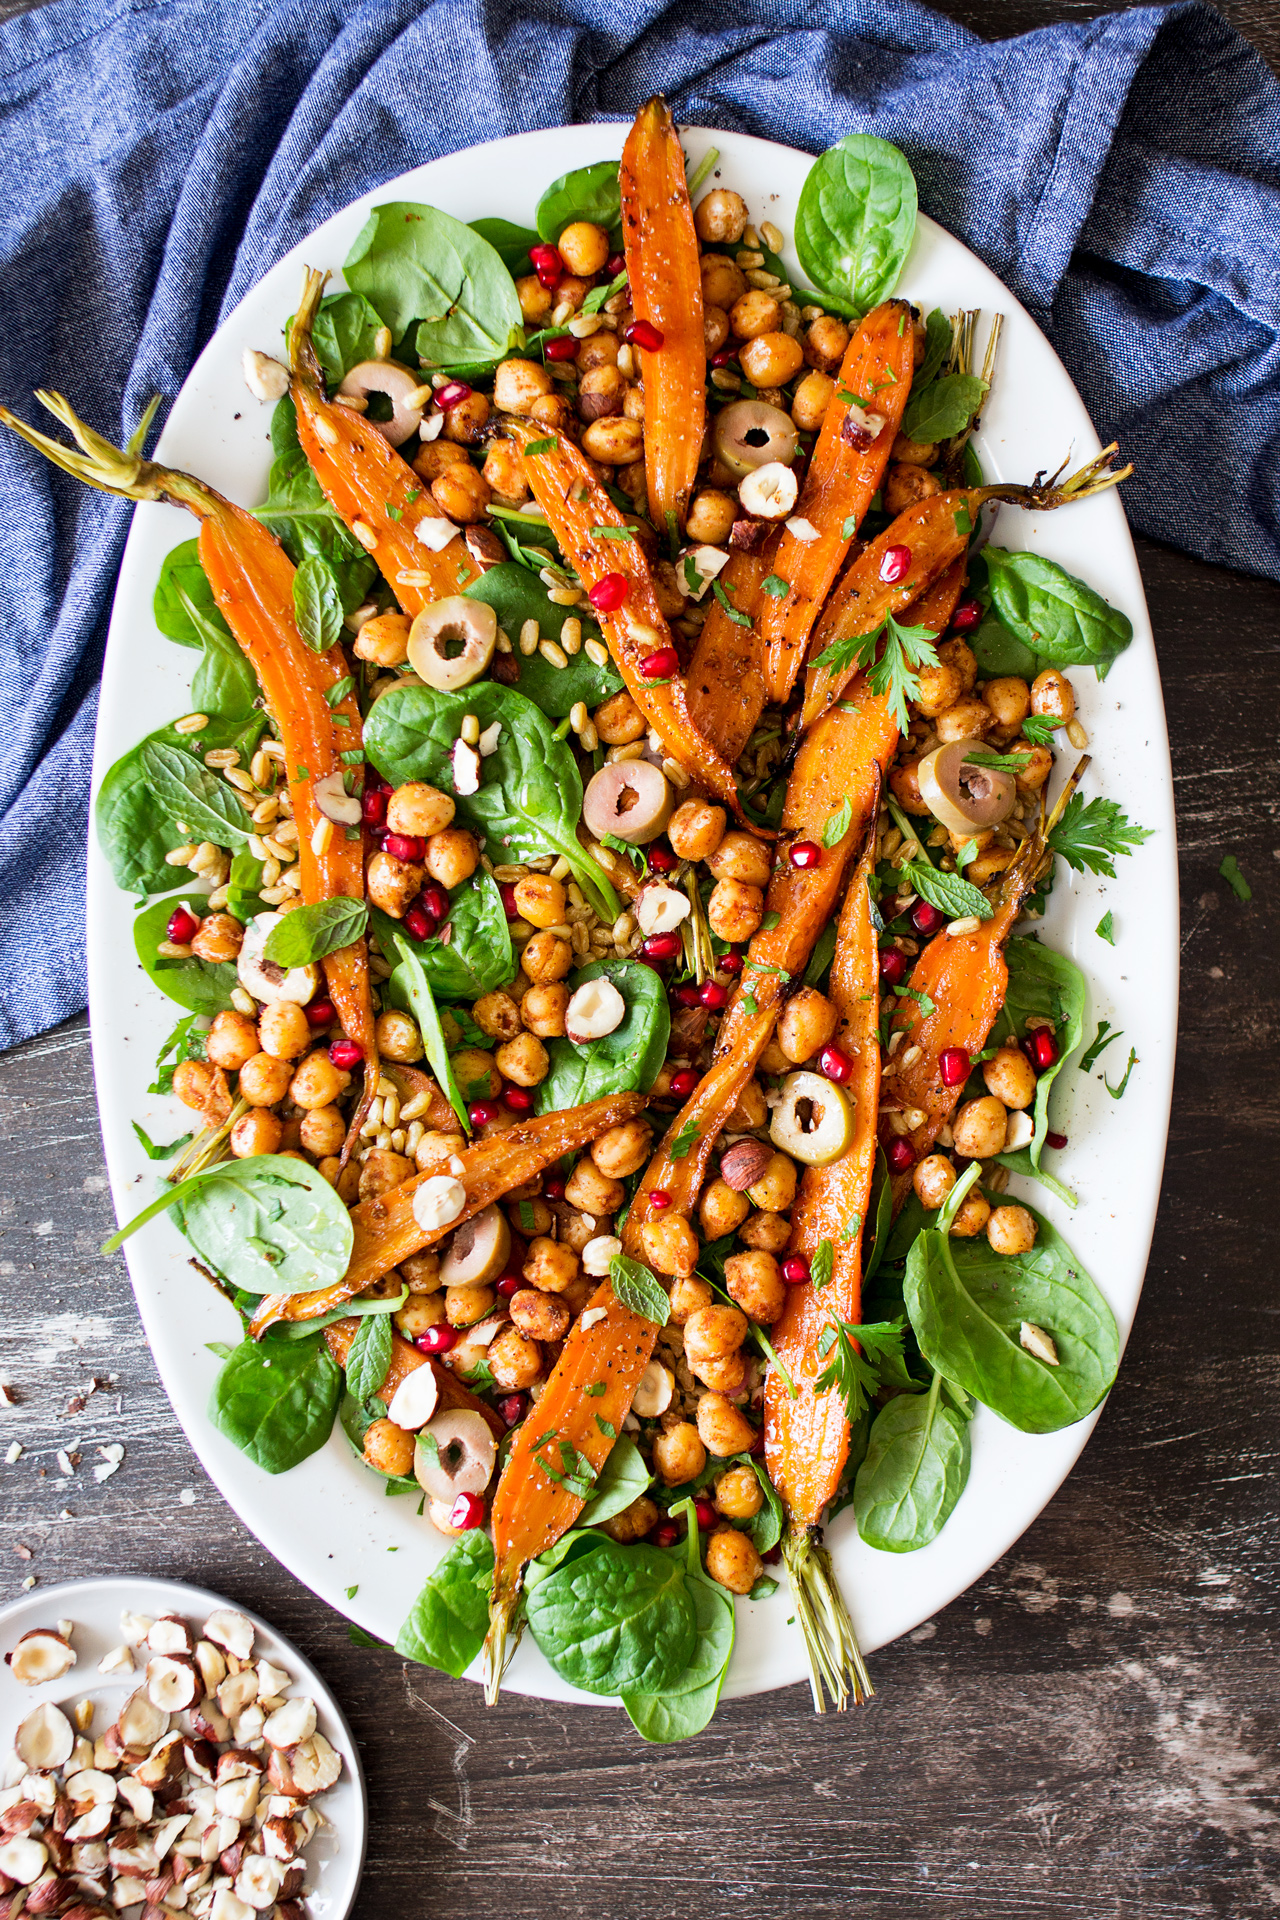 Spiced carrot and chickpea salad - Lazy Cat Kitchen